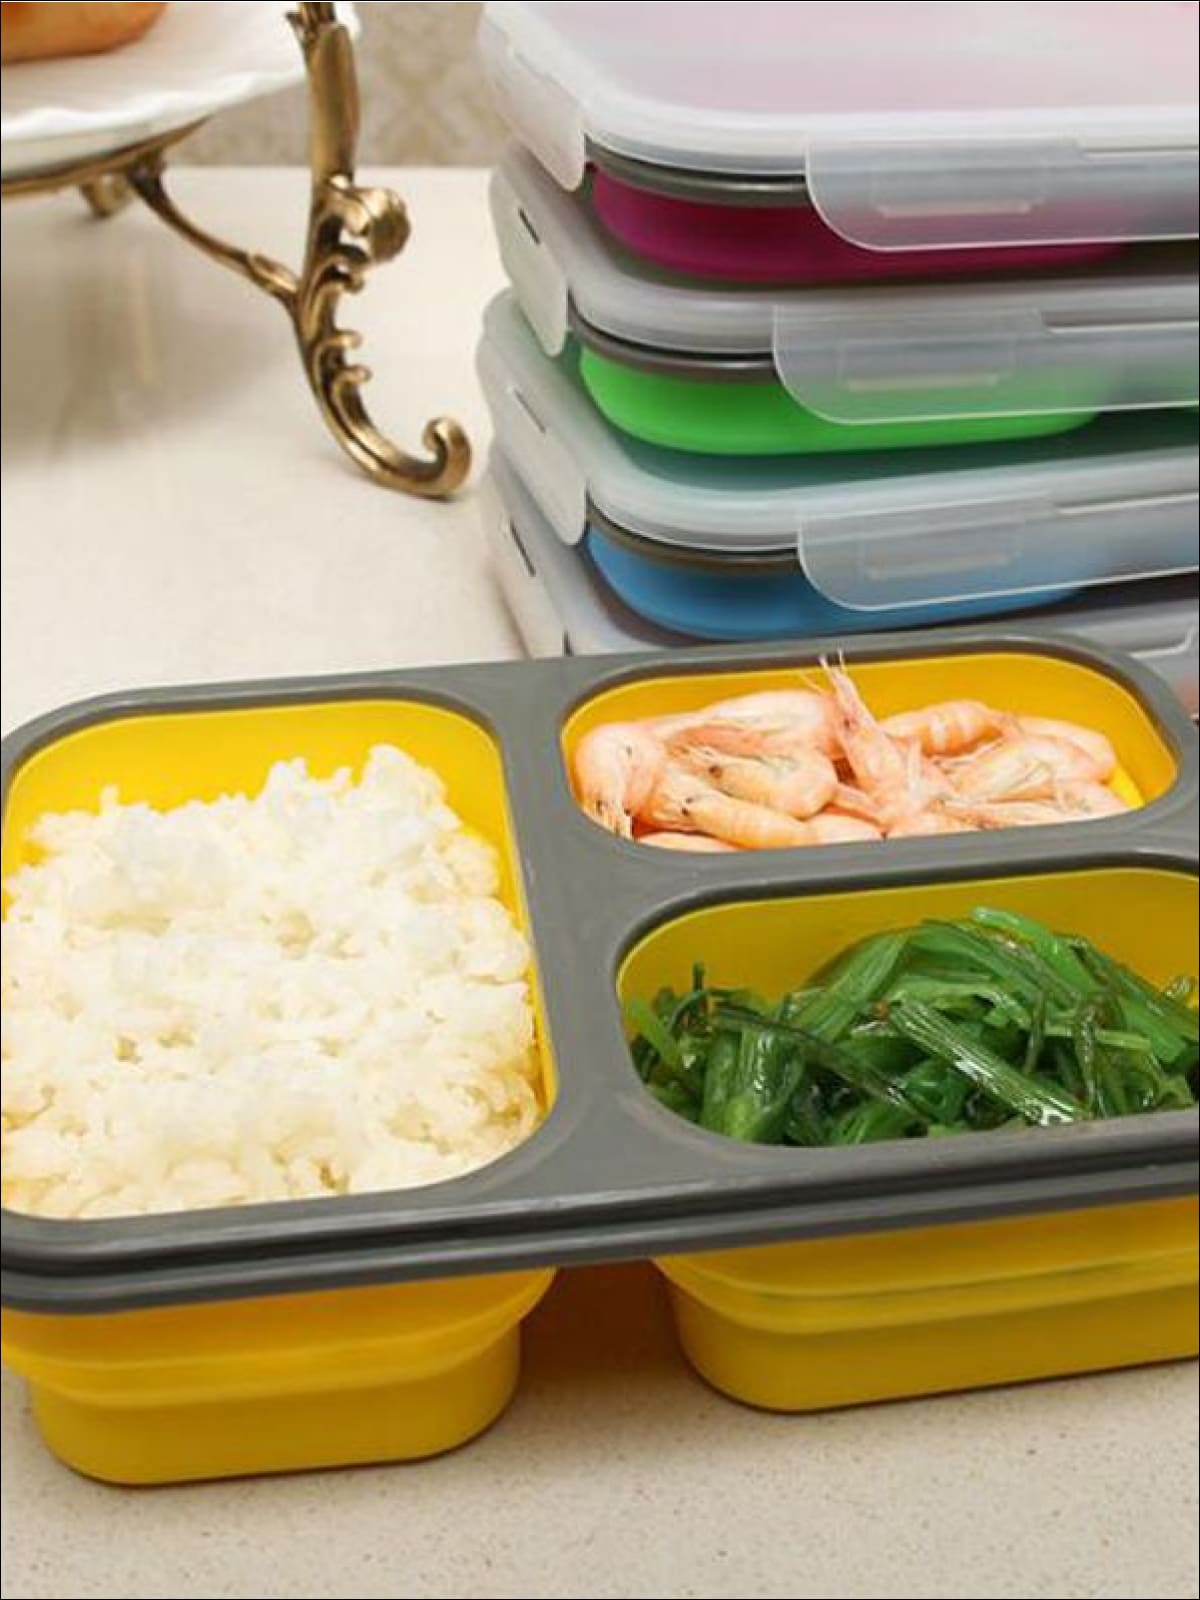 Large Lunch Bento Box Container (3 colors)